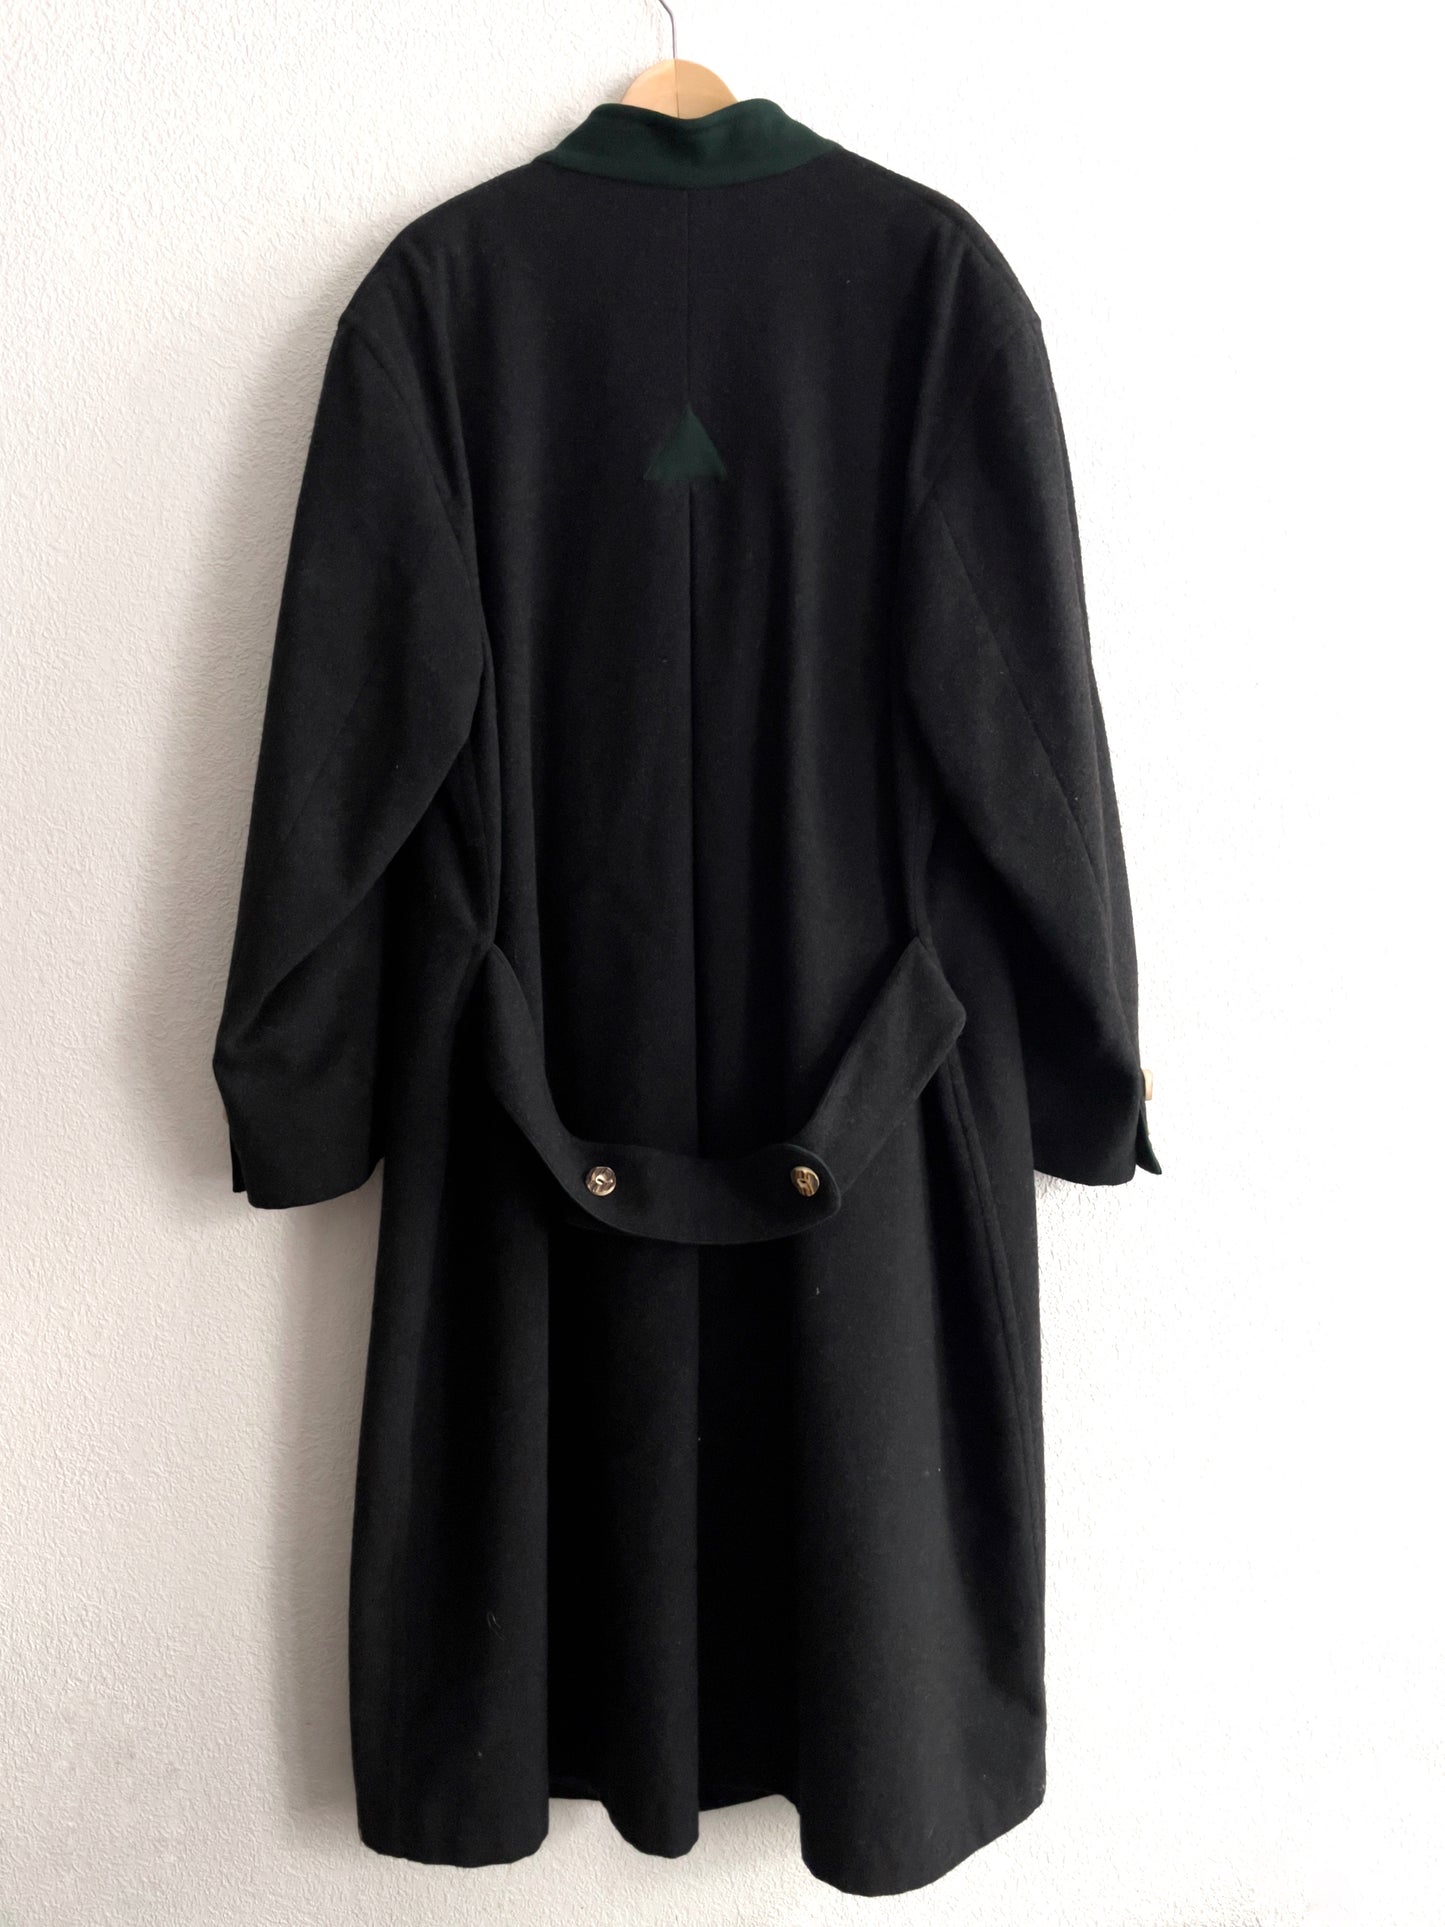 Vintage Loden Coat  - 100% Pure Wool